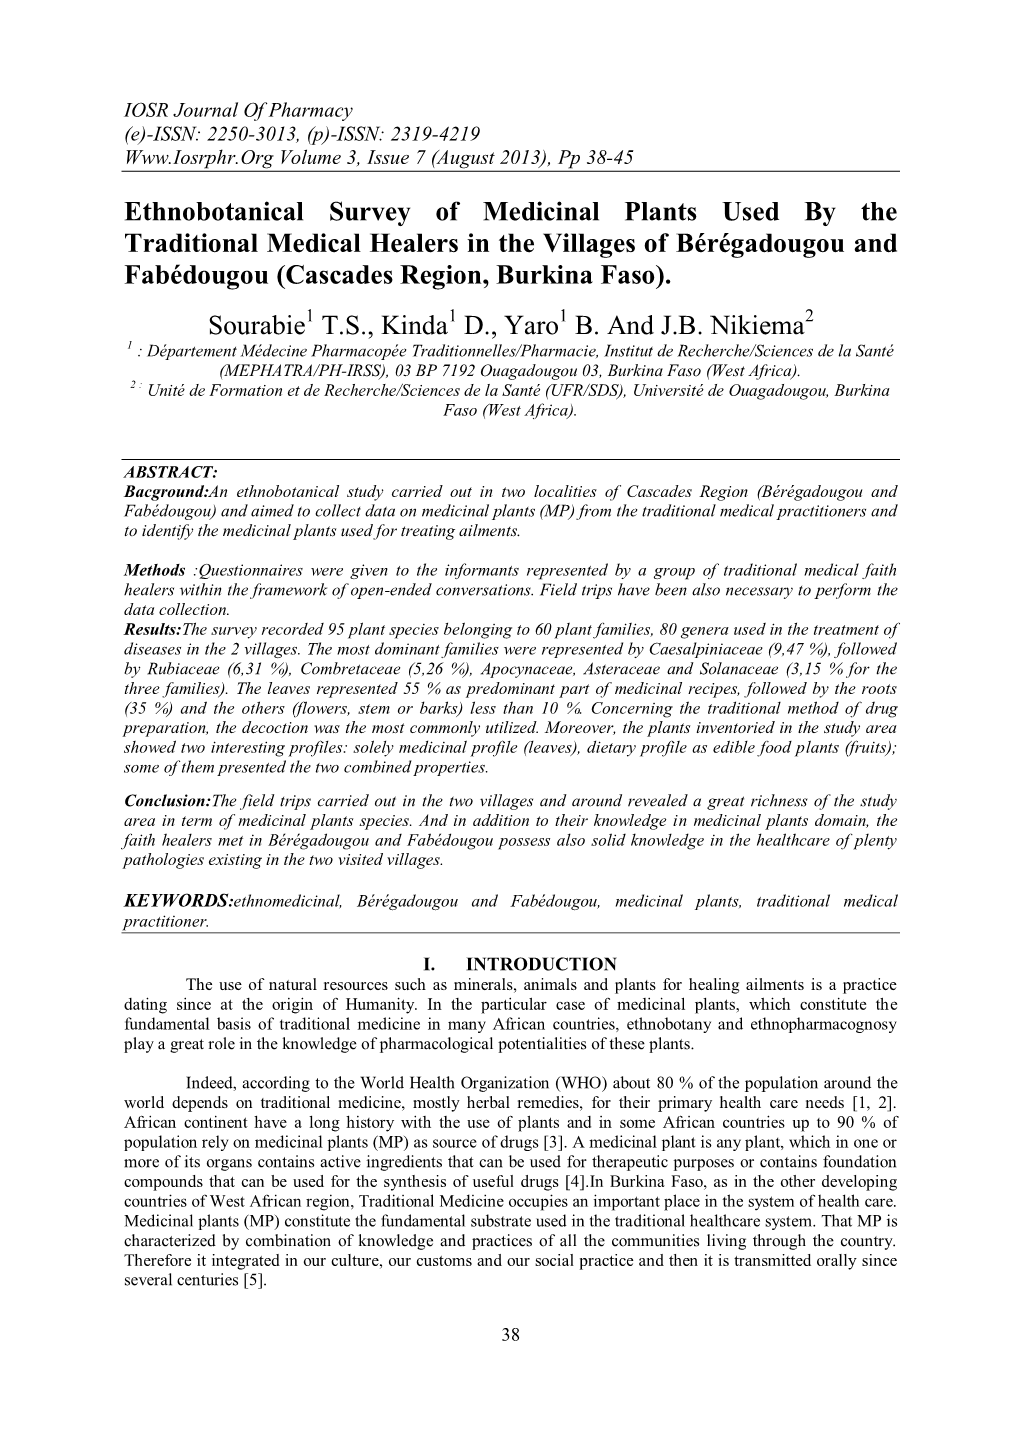 Ethnobotanical Survey of Medicinal Plants Used by the Traditional Medical Healers in the Villages of Bérégadougou and Fabédougou (Cascades Region, Burkina Faso)